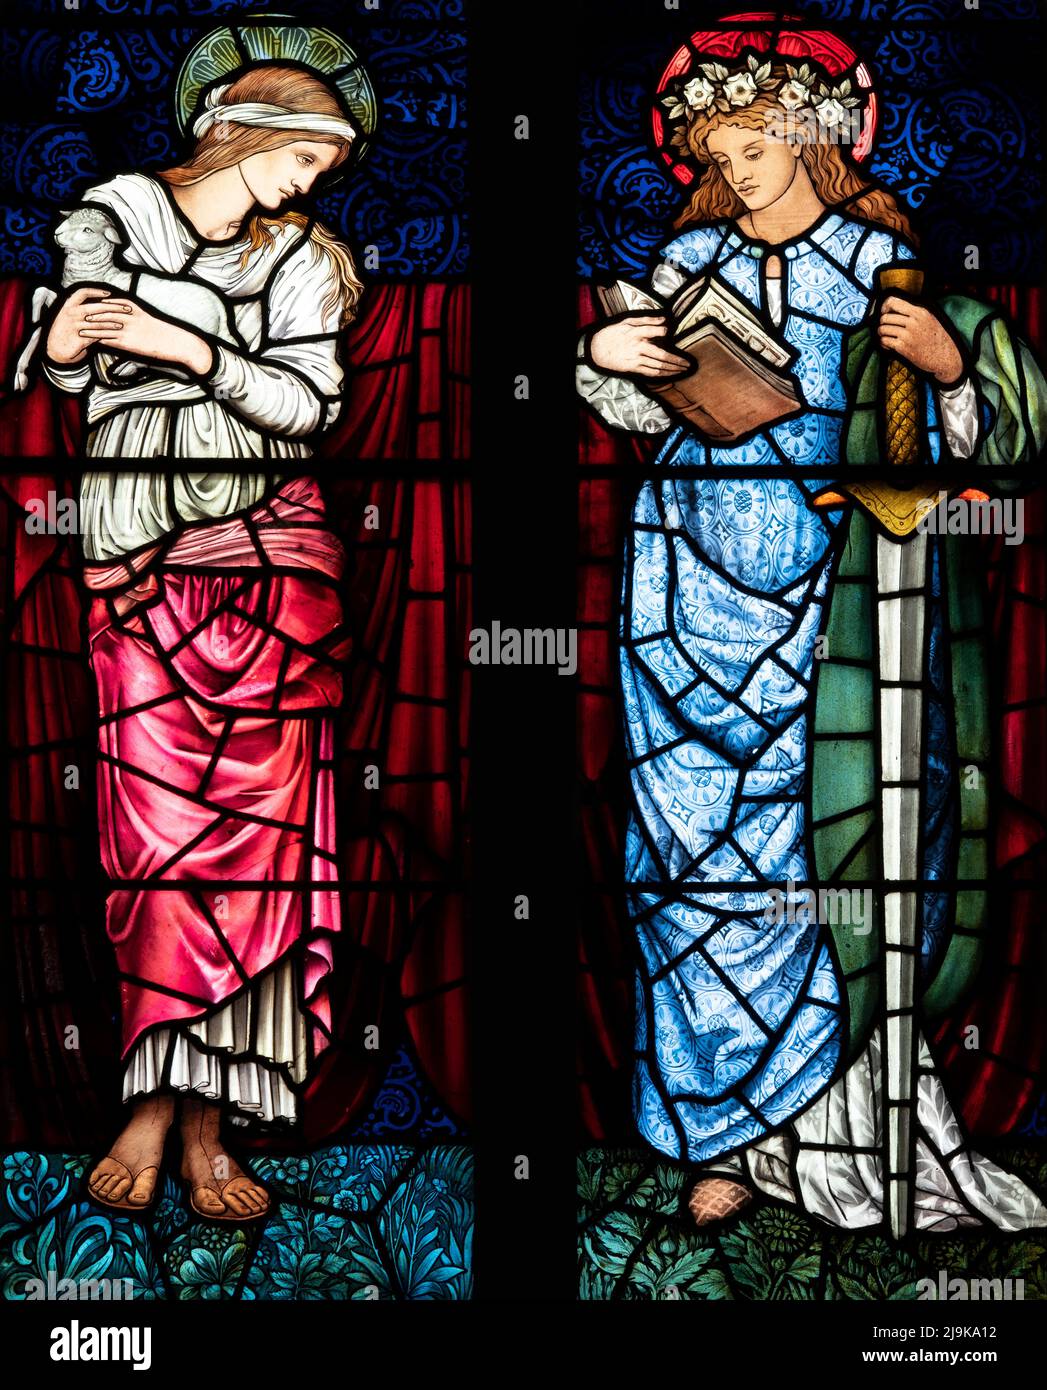 Detail from stained glass window of St Agnes and St Catherine by Edward Burne-Jones and William Morris, St Paul's Church, Irton, Cumbria, UK Stock Photo